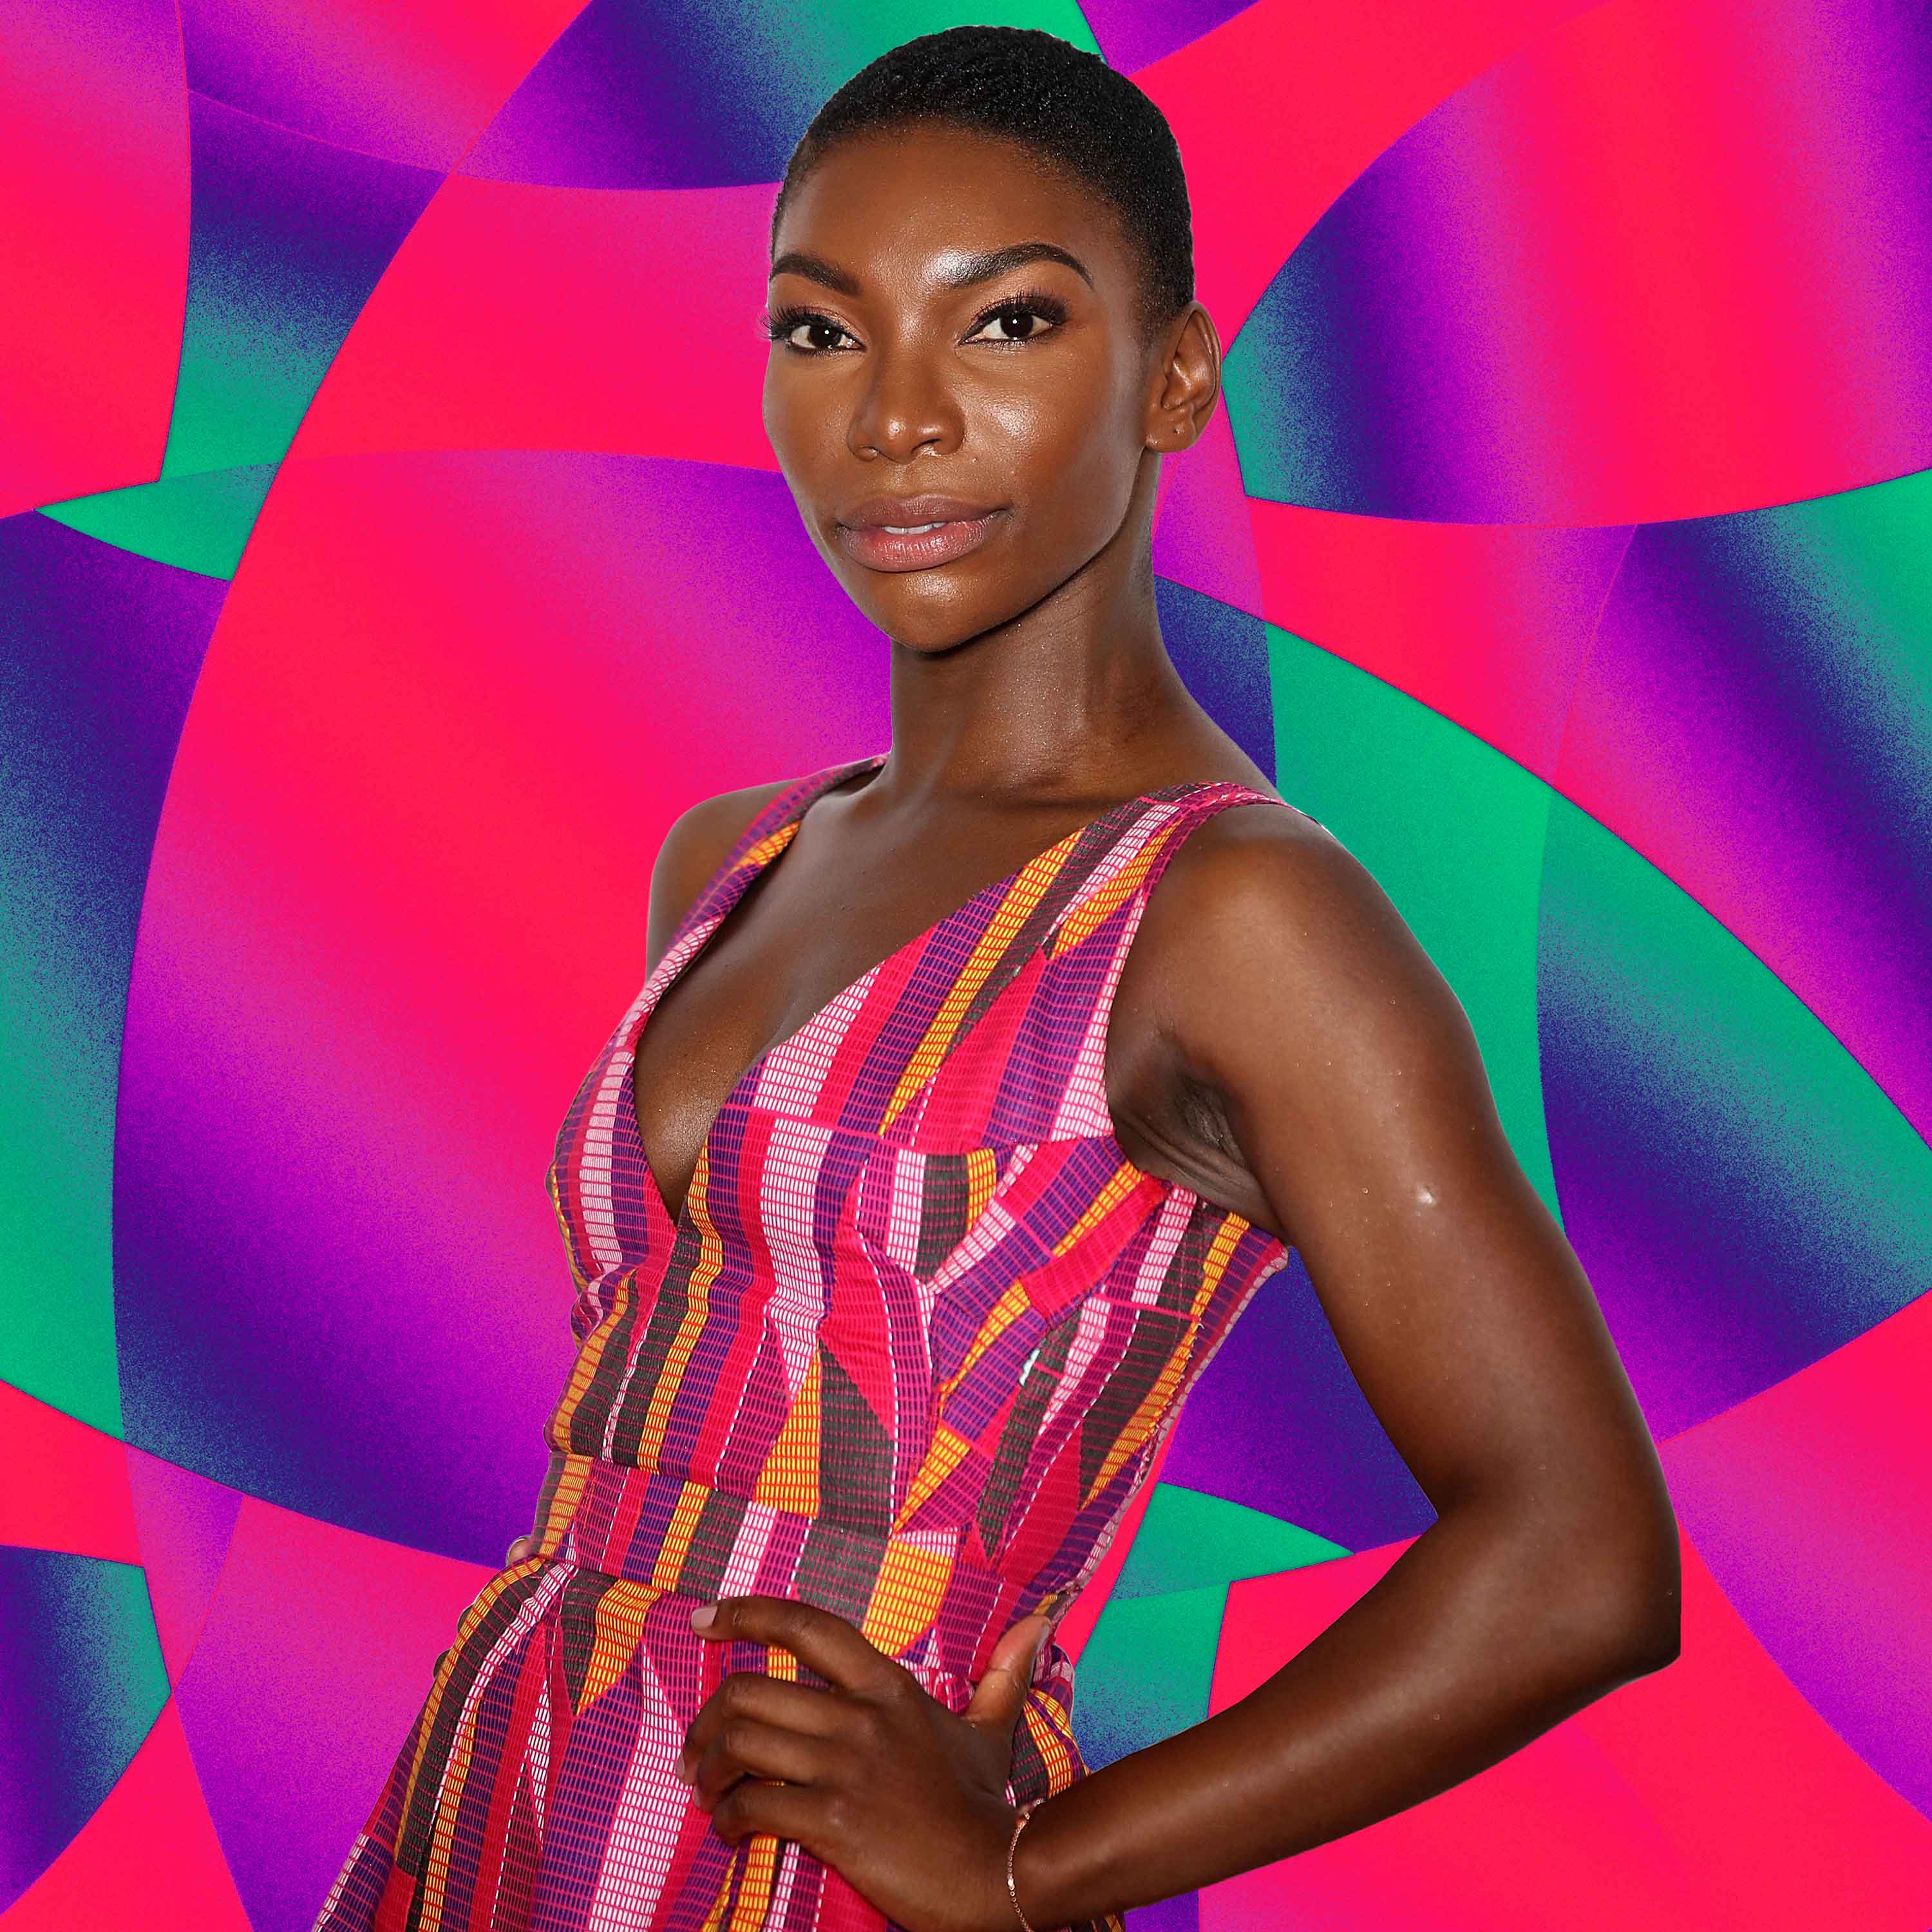 Michaela Coel Reveals That She Was Sexually Assaulted While Writing 'Chewing Gum'